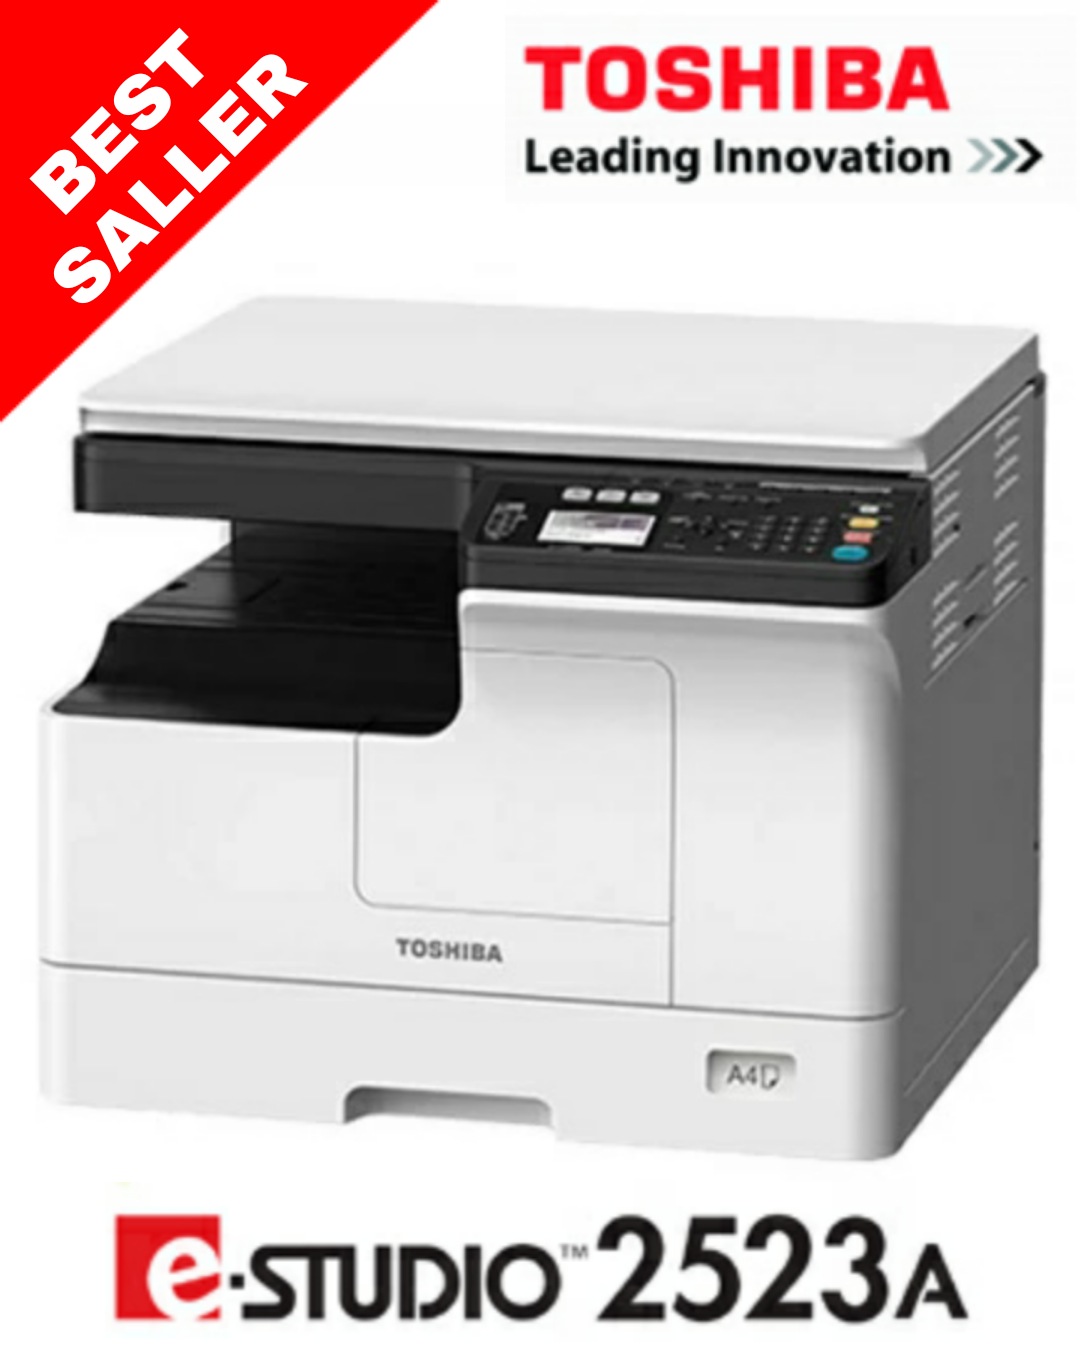 toshiba-e-studio-2523a-photocopier-at-low-price-in-bd-best-chioce-best-saller-product-in-dhaka-city-